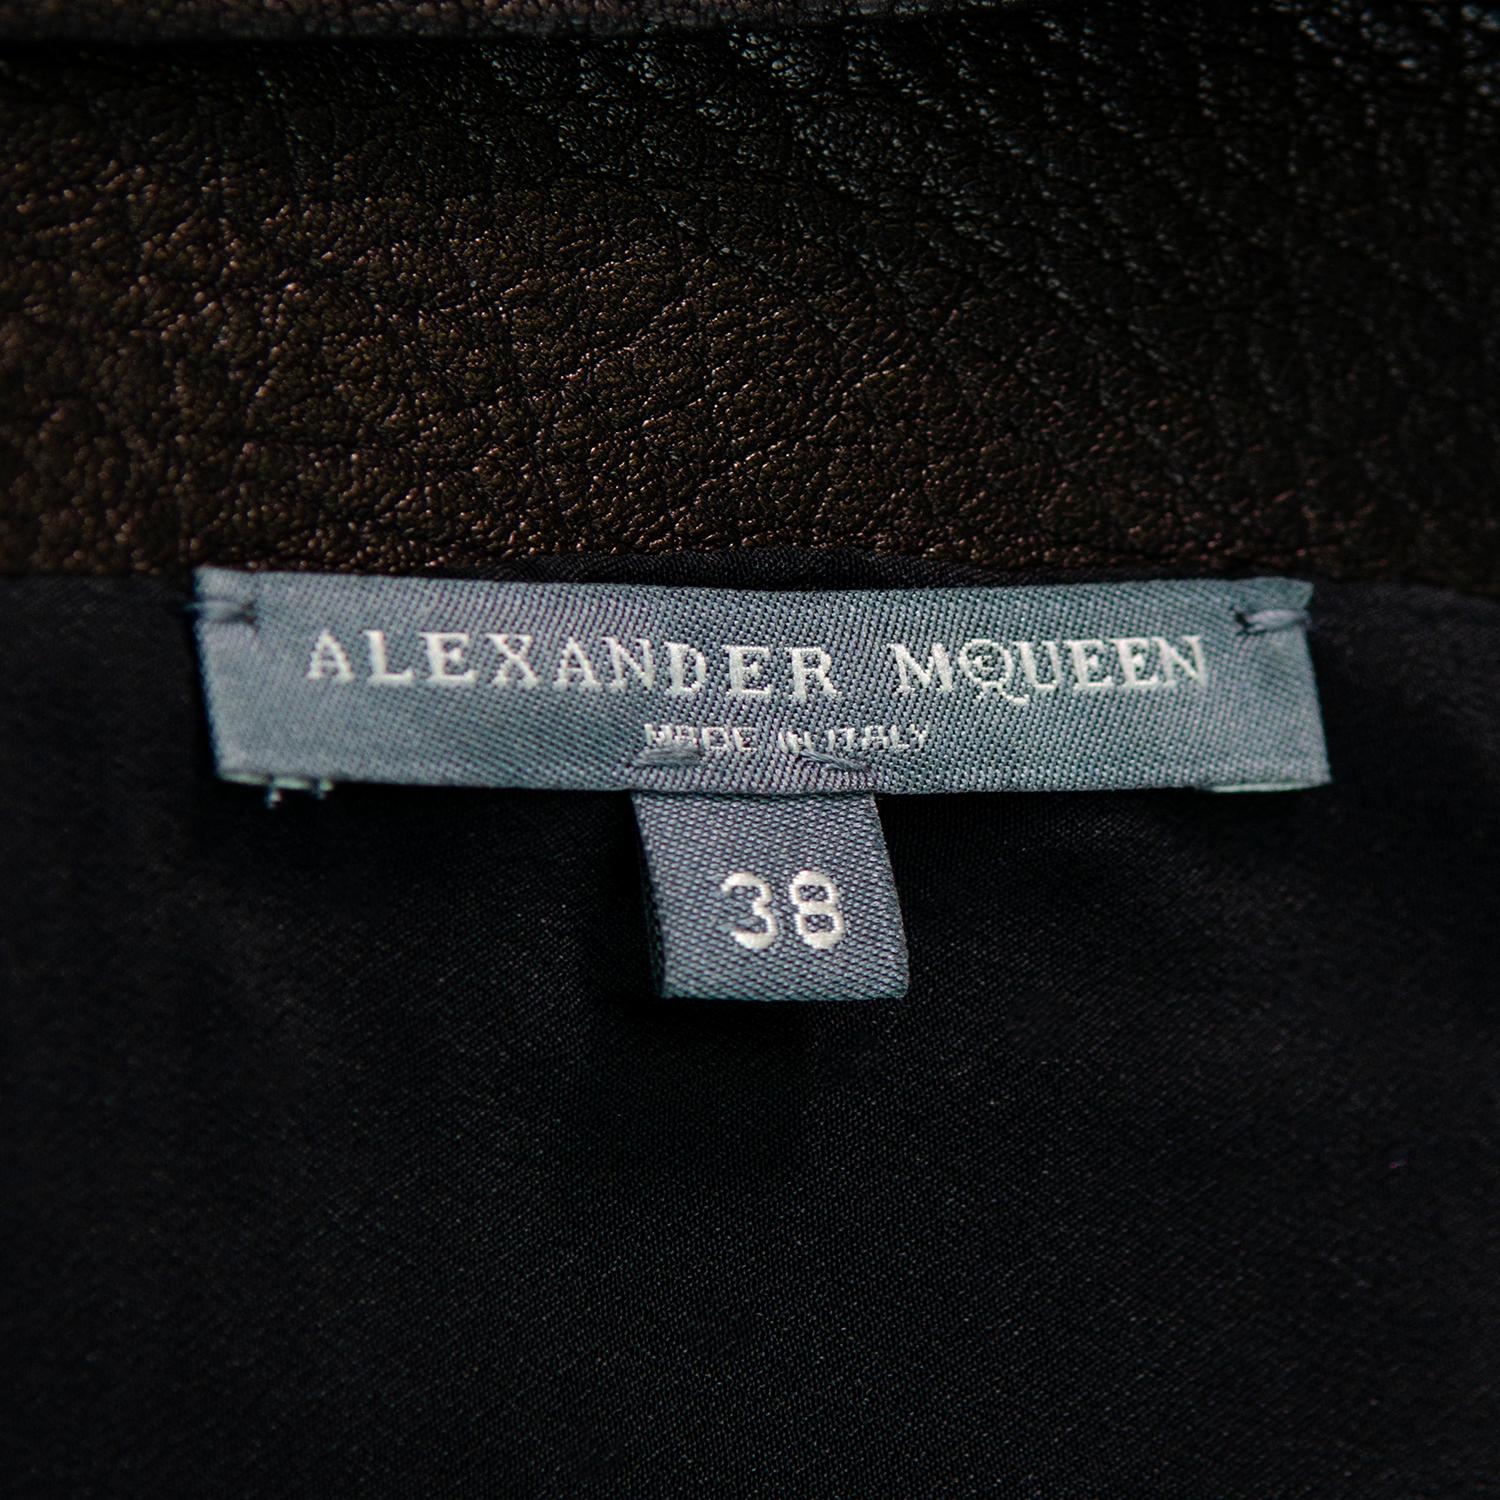 ALEXANDER MCQUEEN Textured Leather Bubble Dress For Sale 5